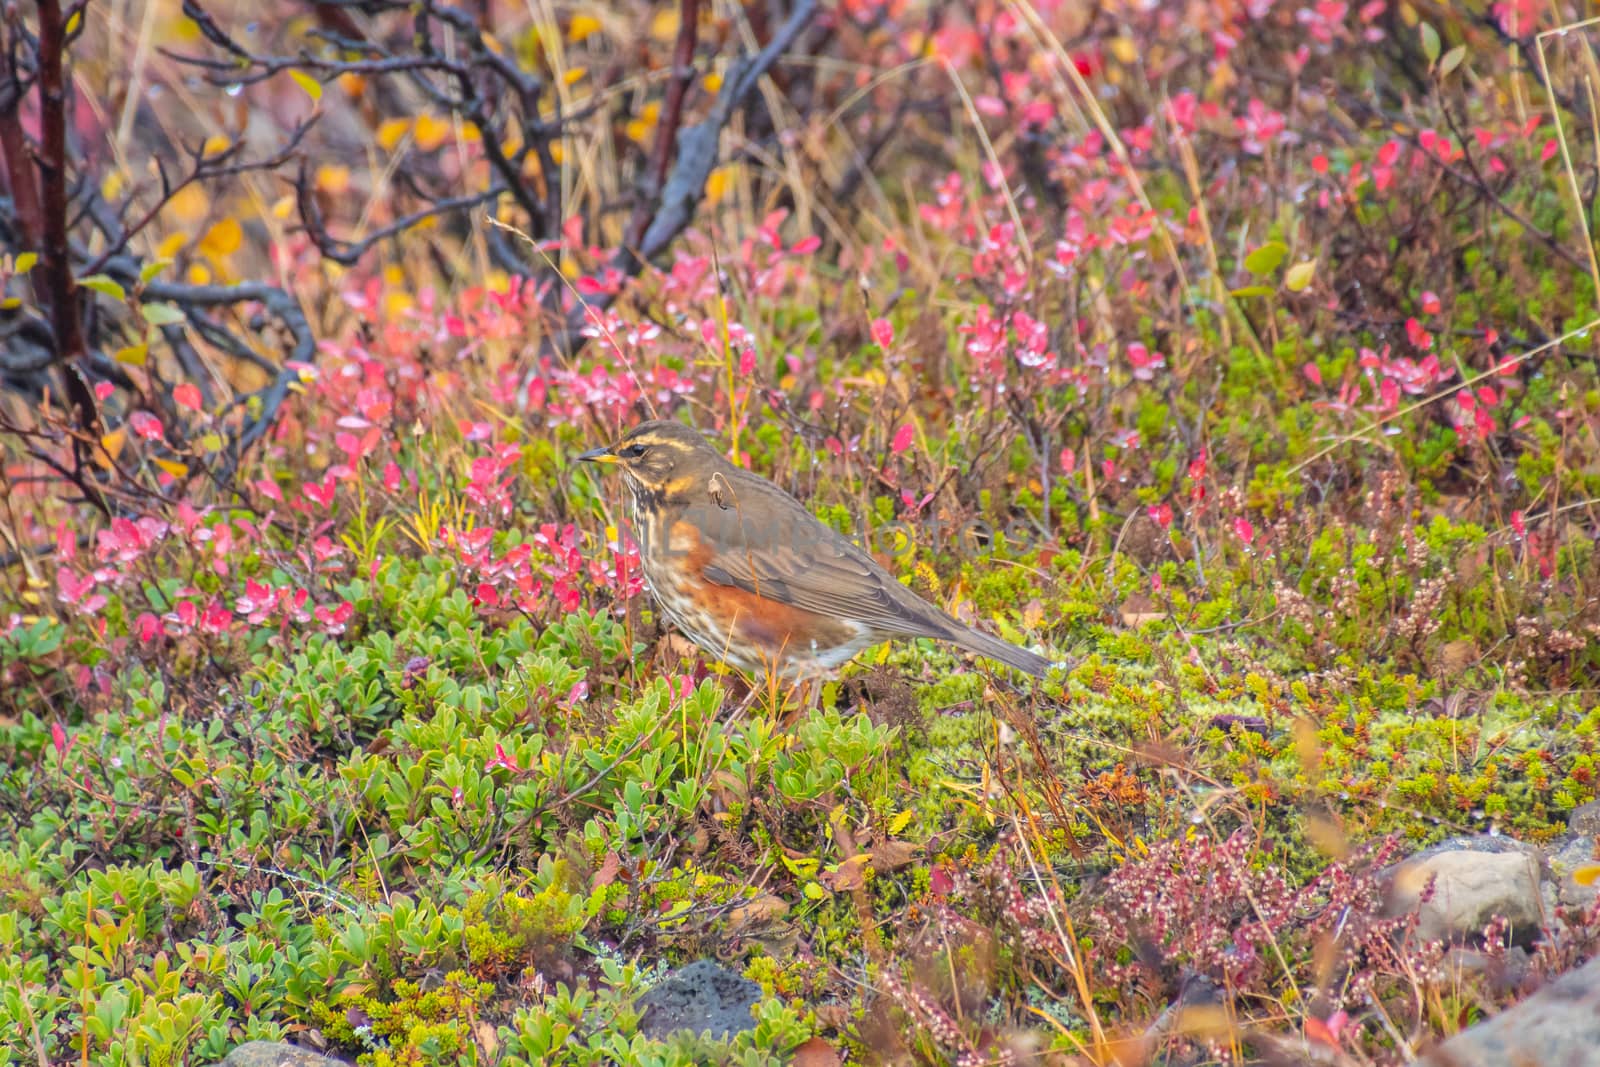 Red wing bird with colorful feathers between small trees and bushes in Iceland